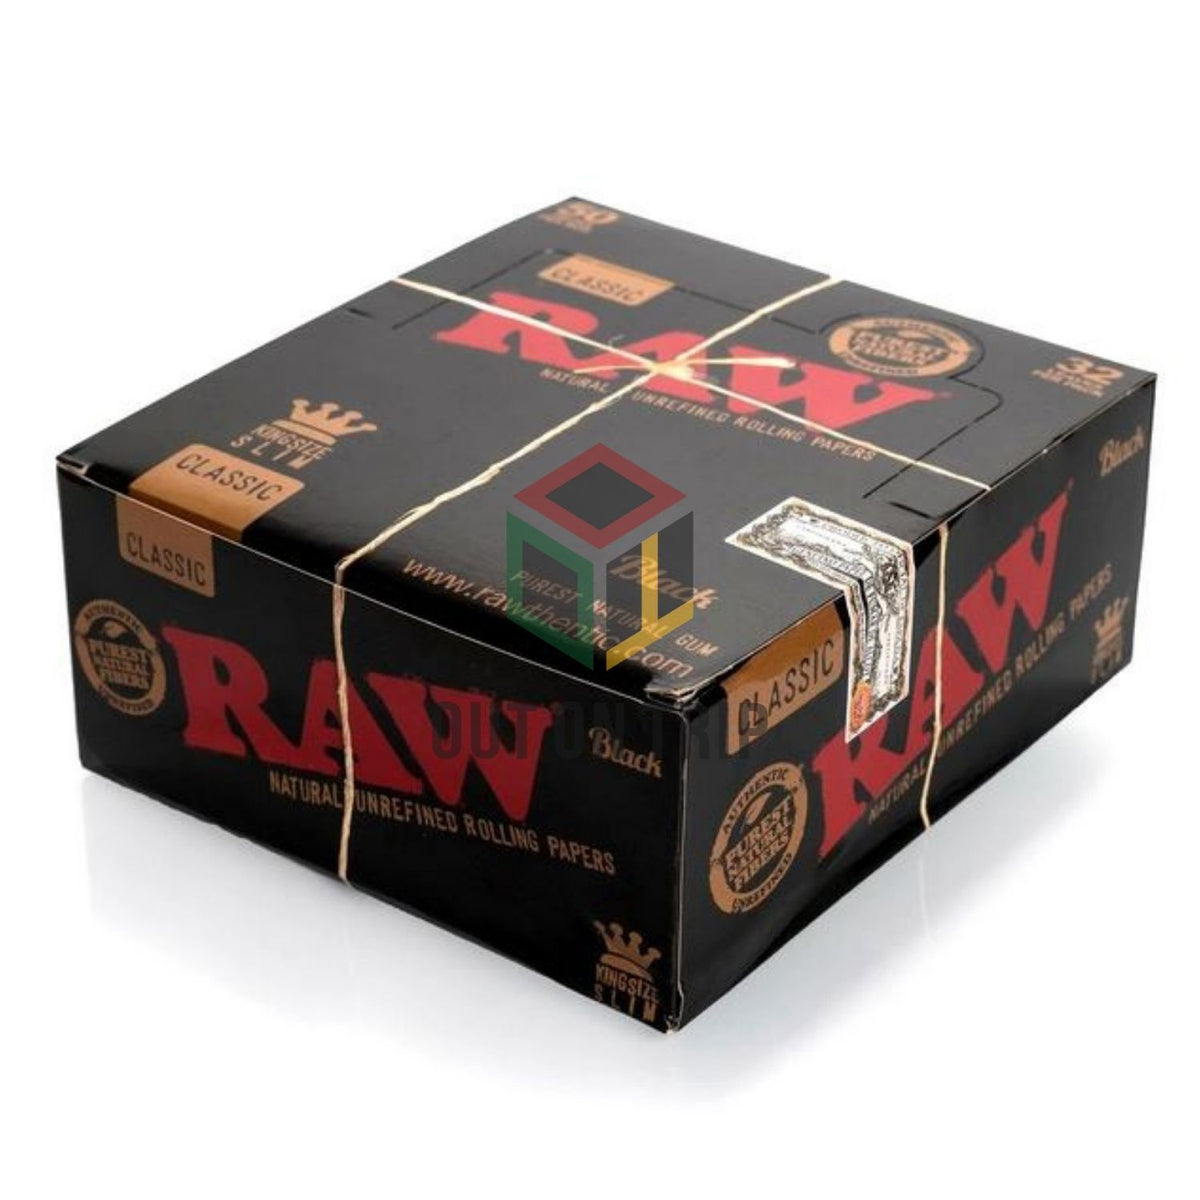 RAW Tips Original Roll Up Tips Full Box | 50 Packs | 50 RAW Tips per Pack |  Naturally Slow Burning Tips Made for Re-Use